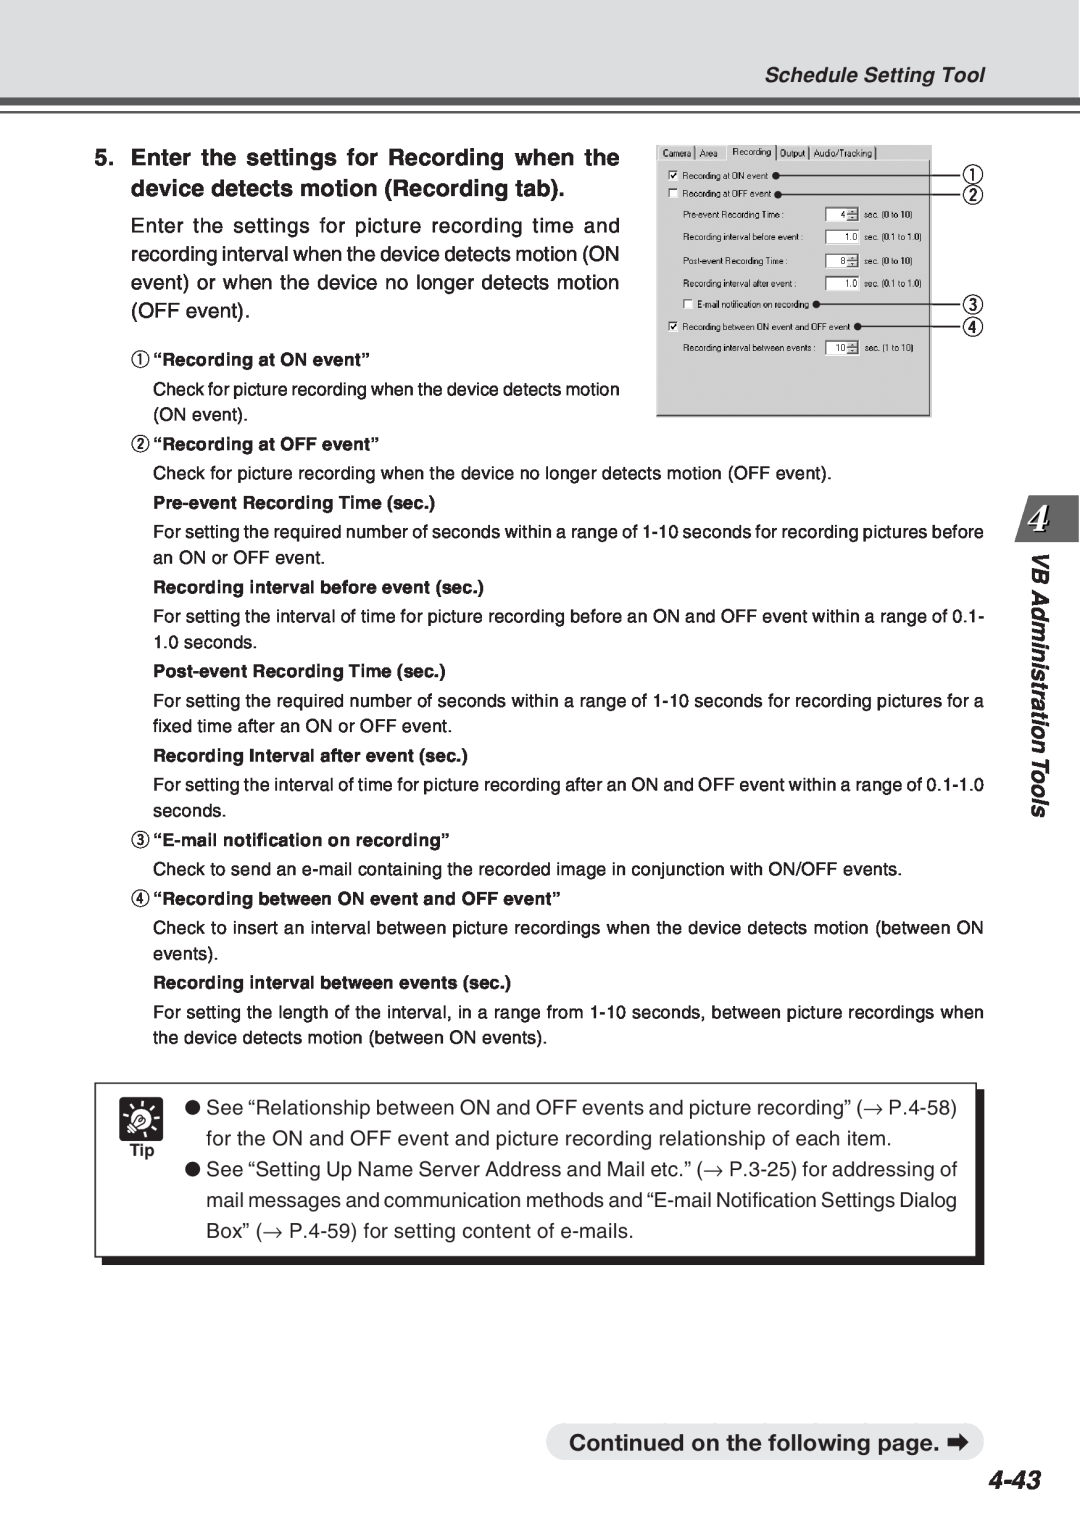 Canon Vb-C50fi user manual 4-43, Enter the settings for Recording when the, device detects motion Recording tab 